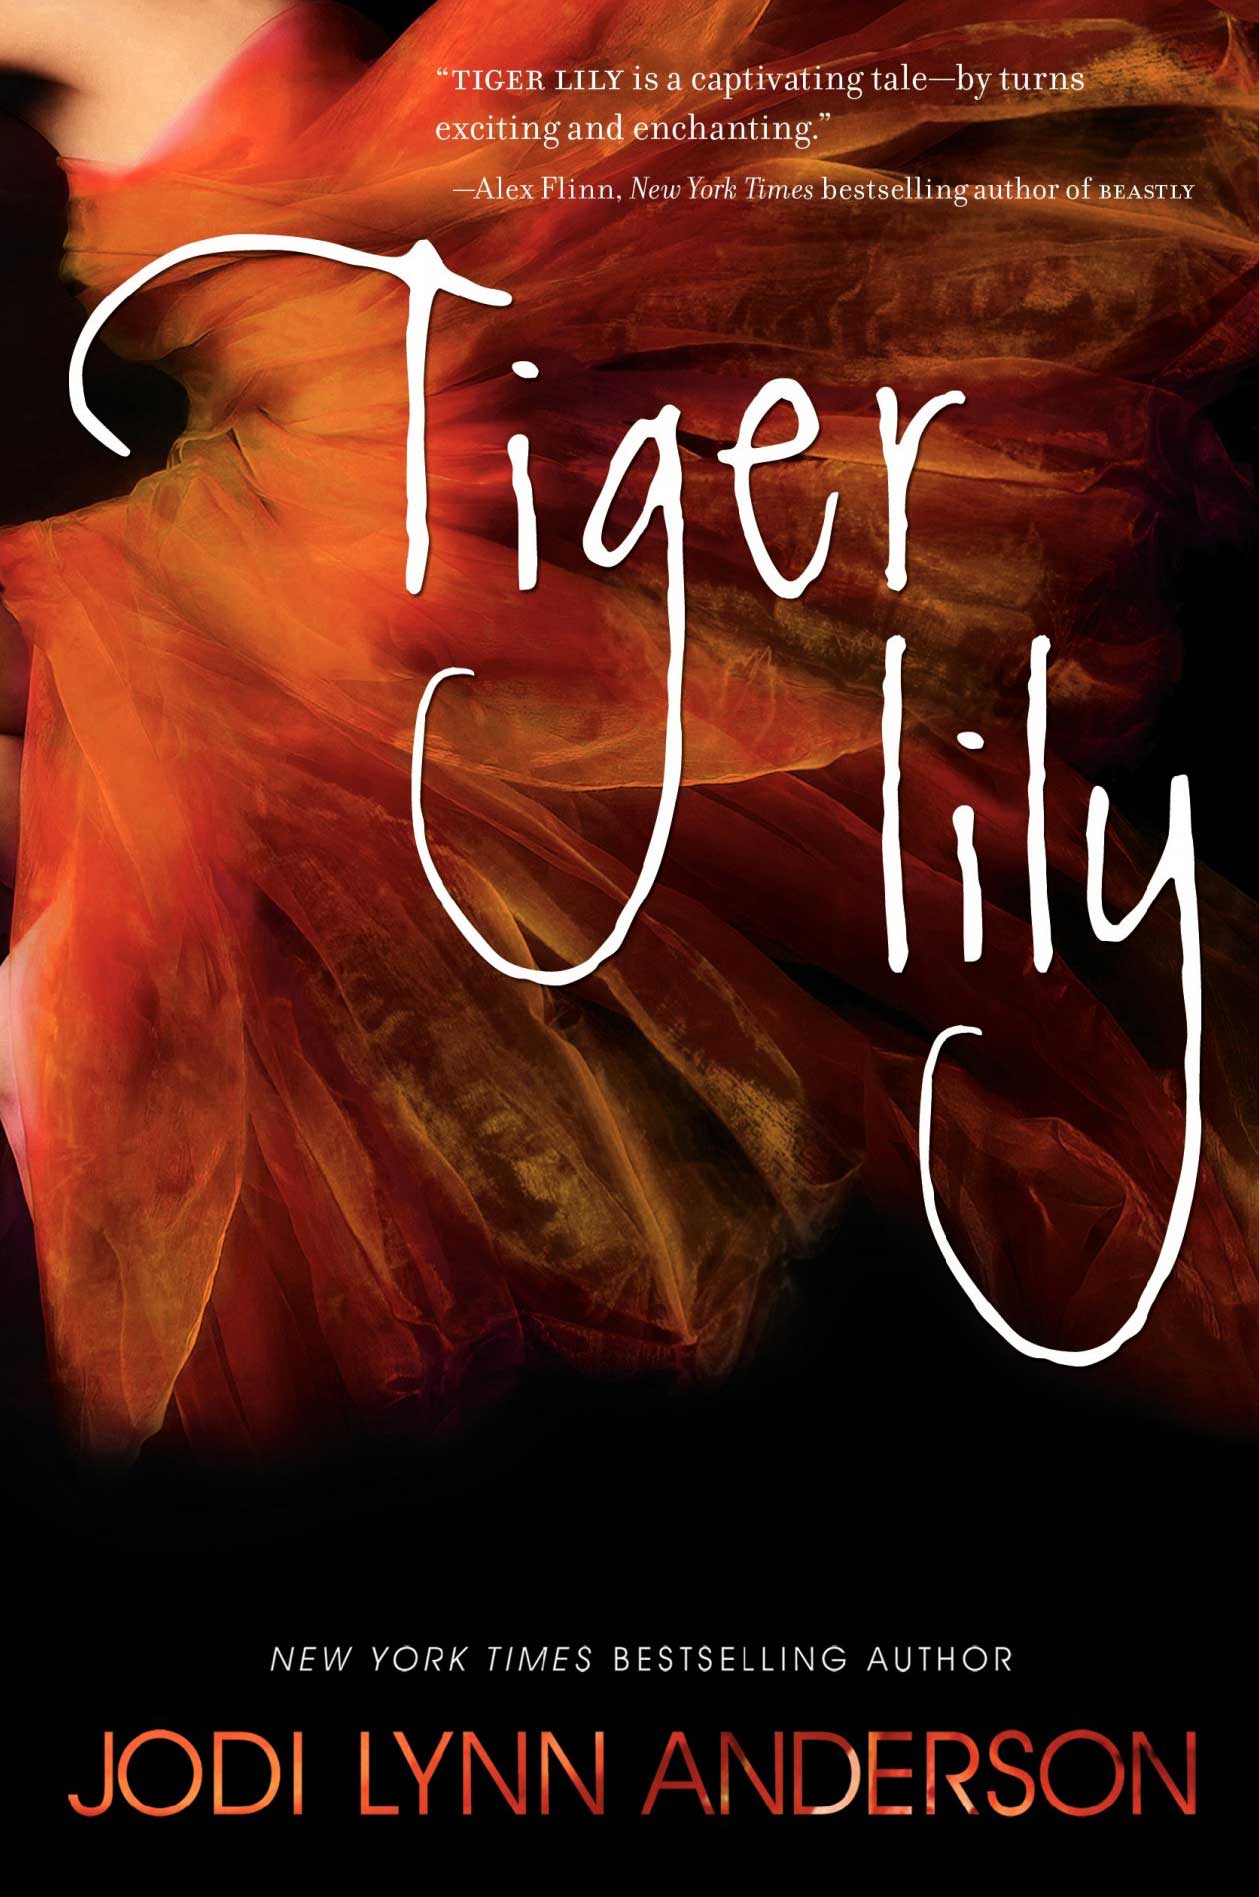 Tiger Lily, by Jodi Lynn Anderson.
                              
                              
                              
                              In a prequel of sorts to Peter Pan, Anderson uses Tinkerbell to tell the story of Peter’s relationship with Tiger Lily before he falls for Wendy Darling.
                              
                              
                              
                              Buy now: Tiger Lily